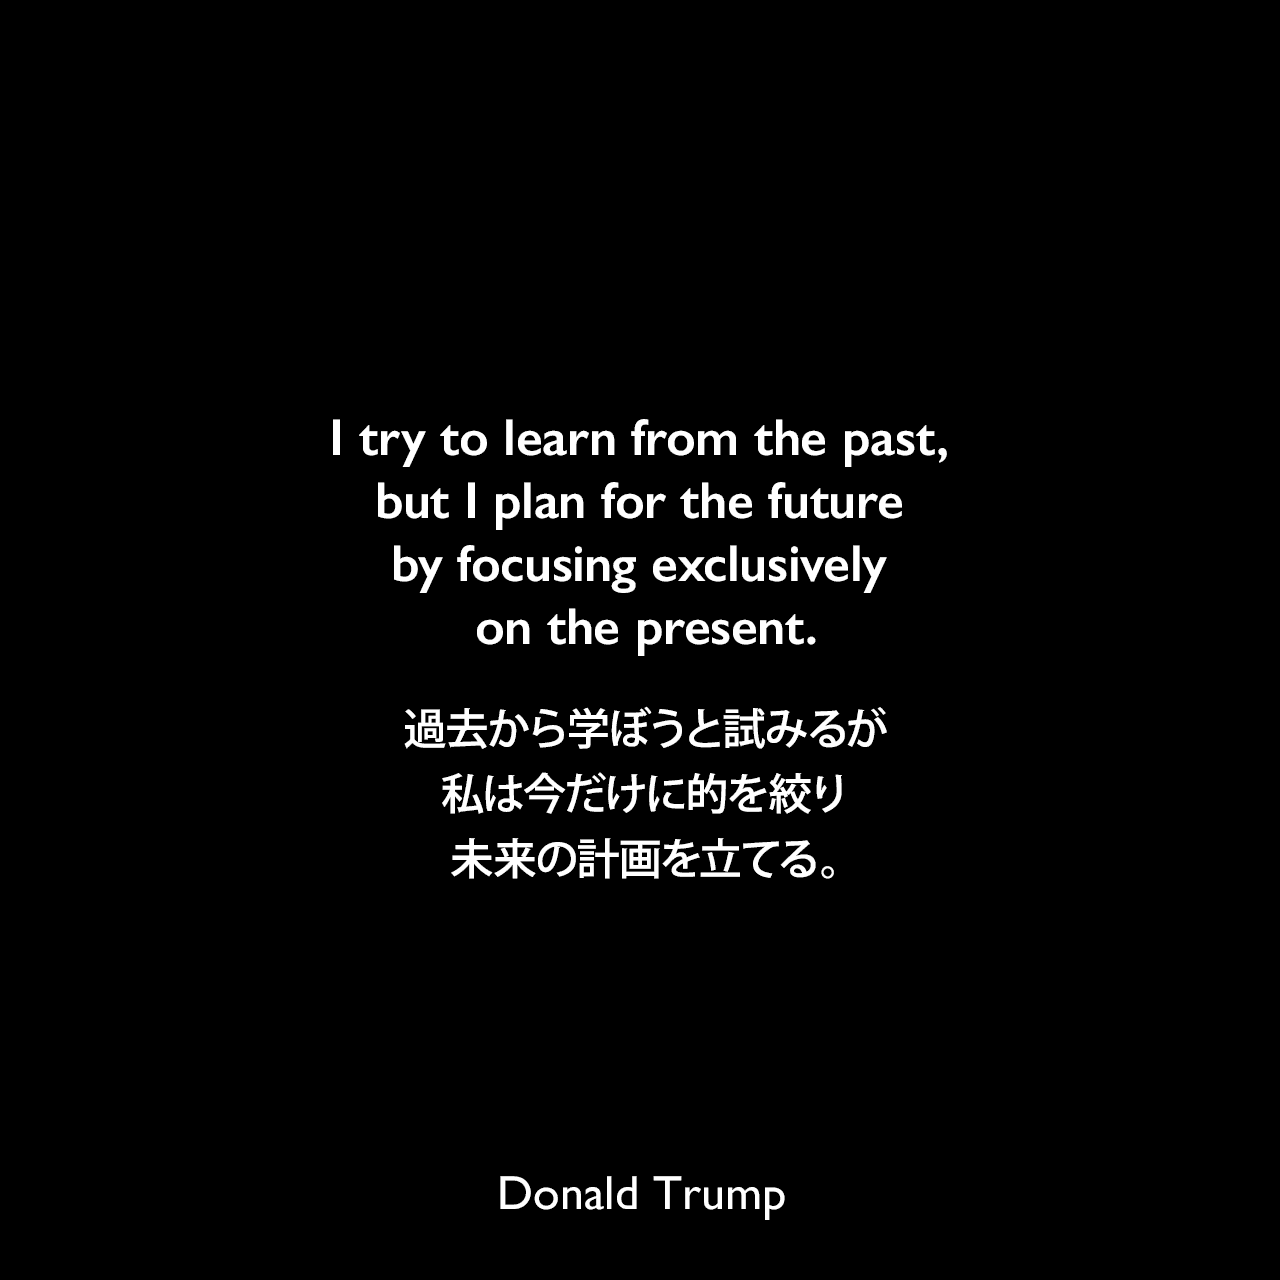 I try to learn from the past, but I plan for the future by focusing exclusively on the present.過去から学ぼうと試みるが、私は今だけに的を絞り未来の計画を立てる。Donald Trump